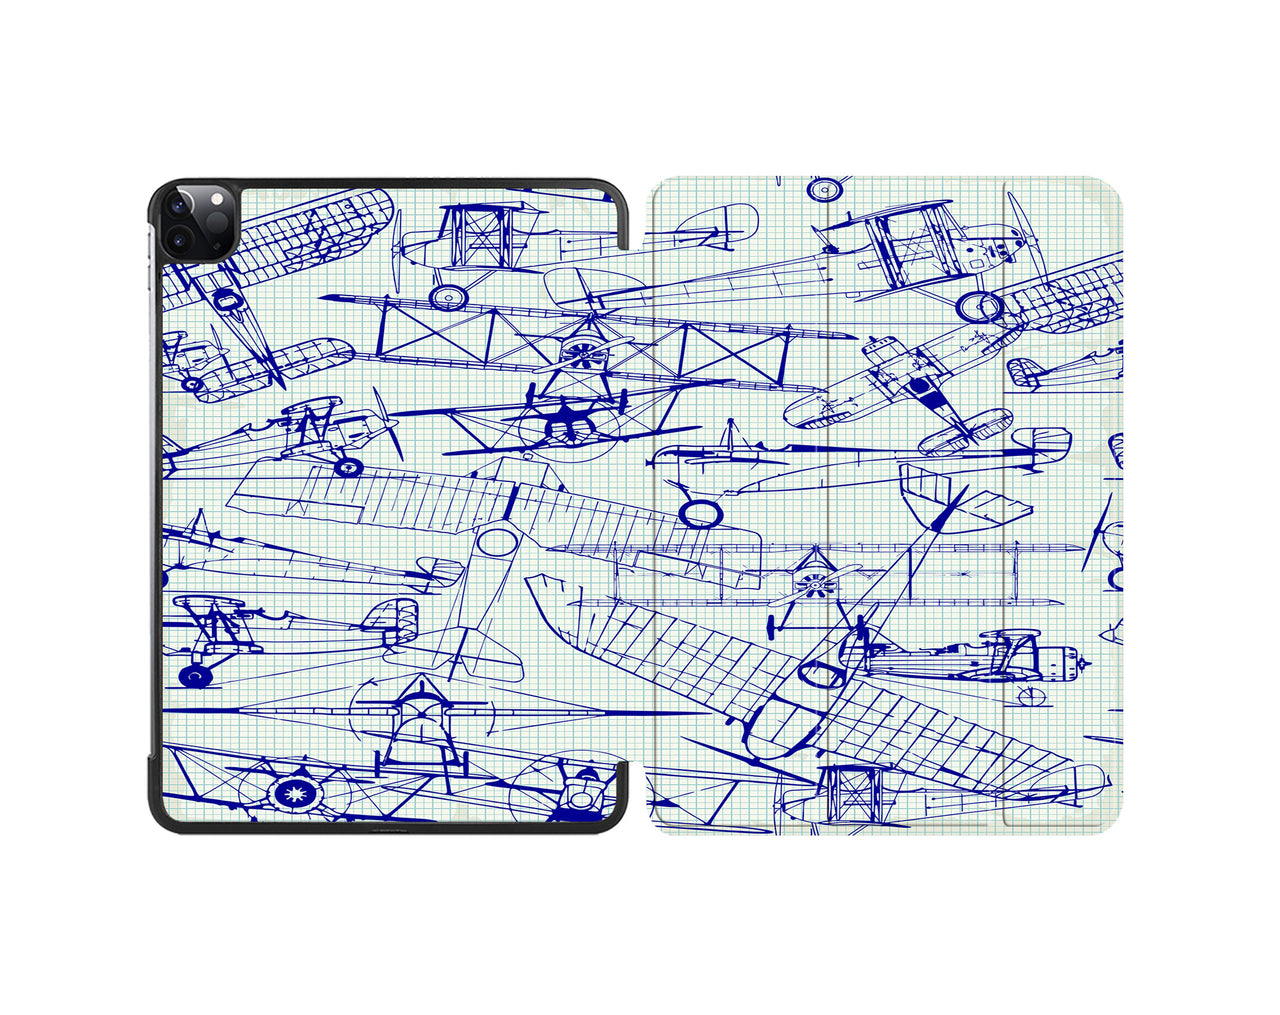 Amazing Drawings of Old Aircrafts Designed iPad Cases